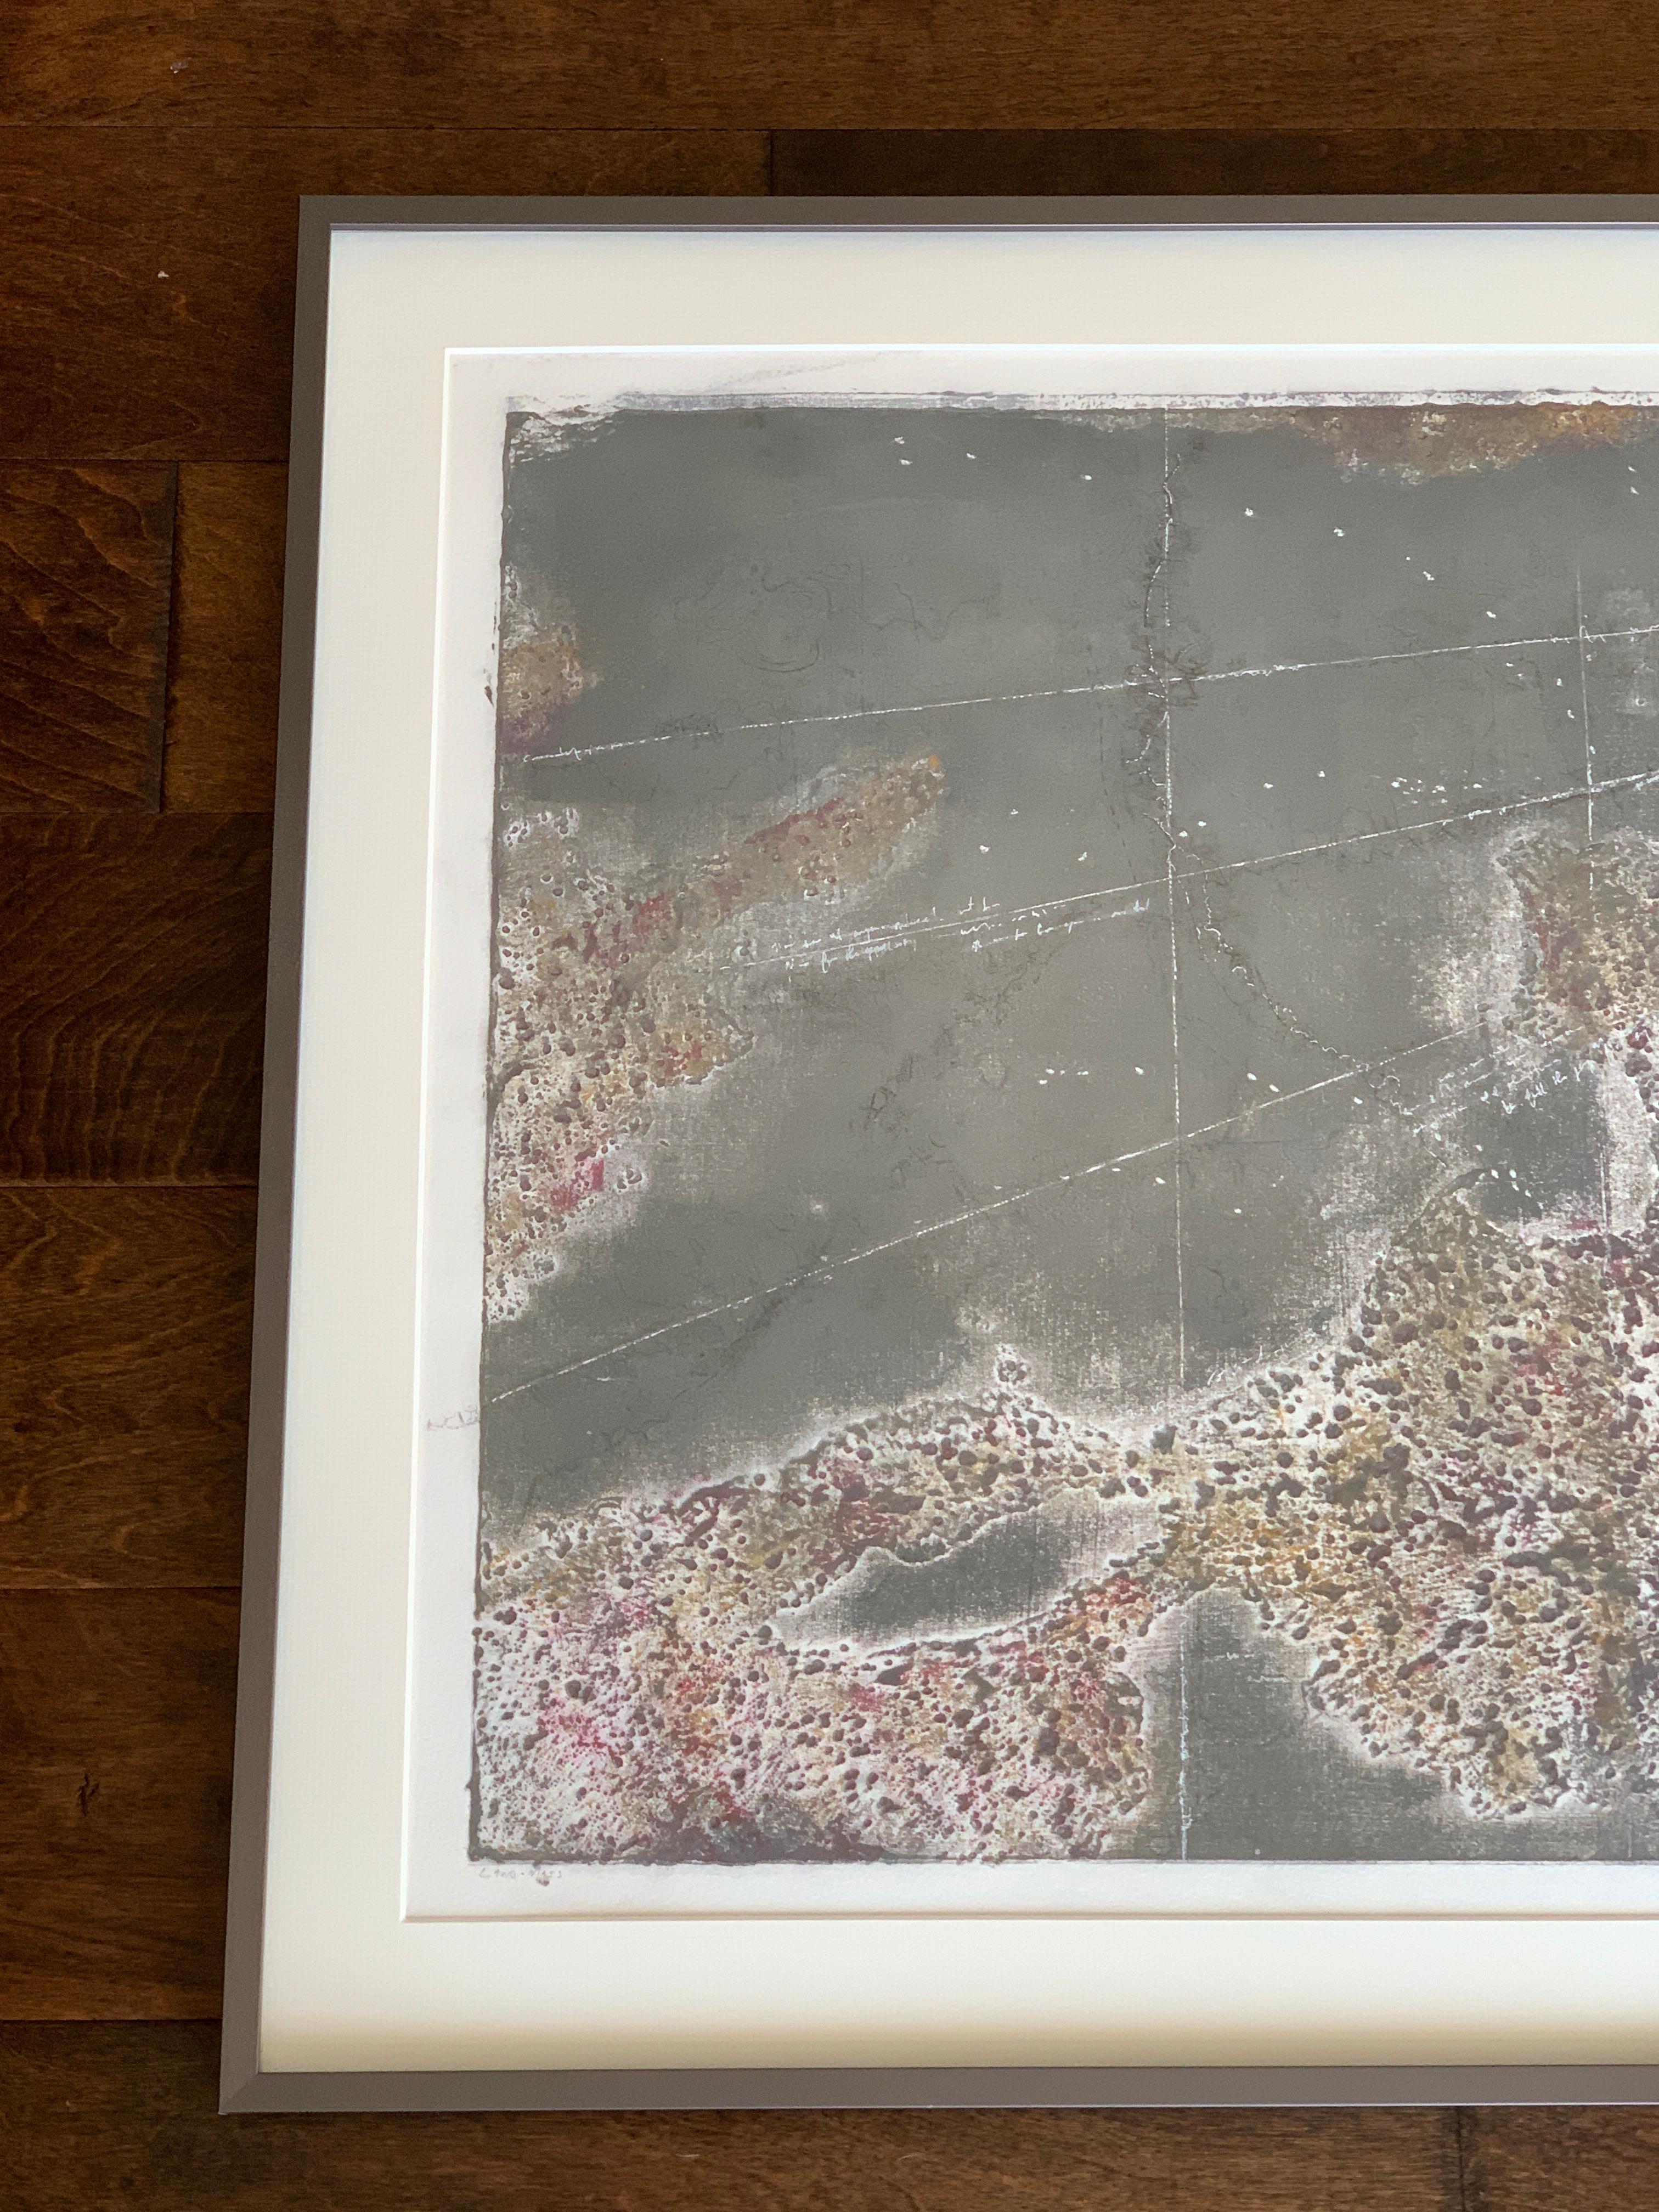 'Land Mass', Laurie Carnohan, 2018.
Edition: 1/1
Collagraph with mixed-media.
30.75in W x 24.25in H x 1.25in D (framed)
Signed, dated, and framed.

You can find more original work by this artist in our L'Objet Bleu storefront on